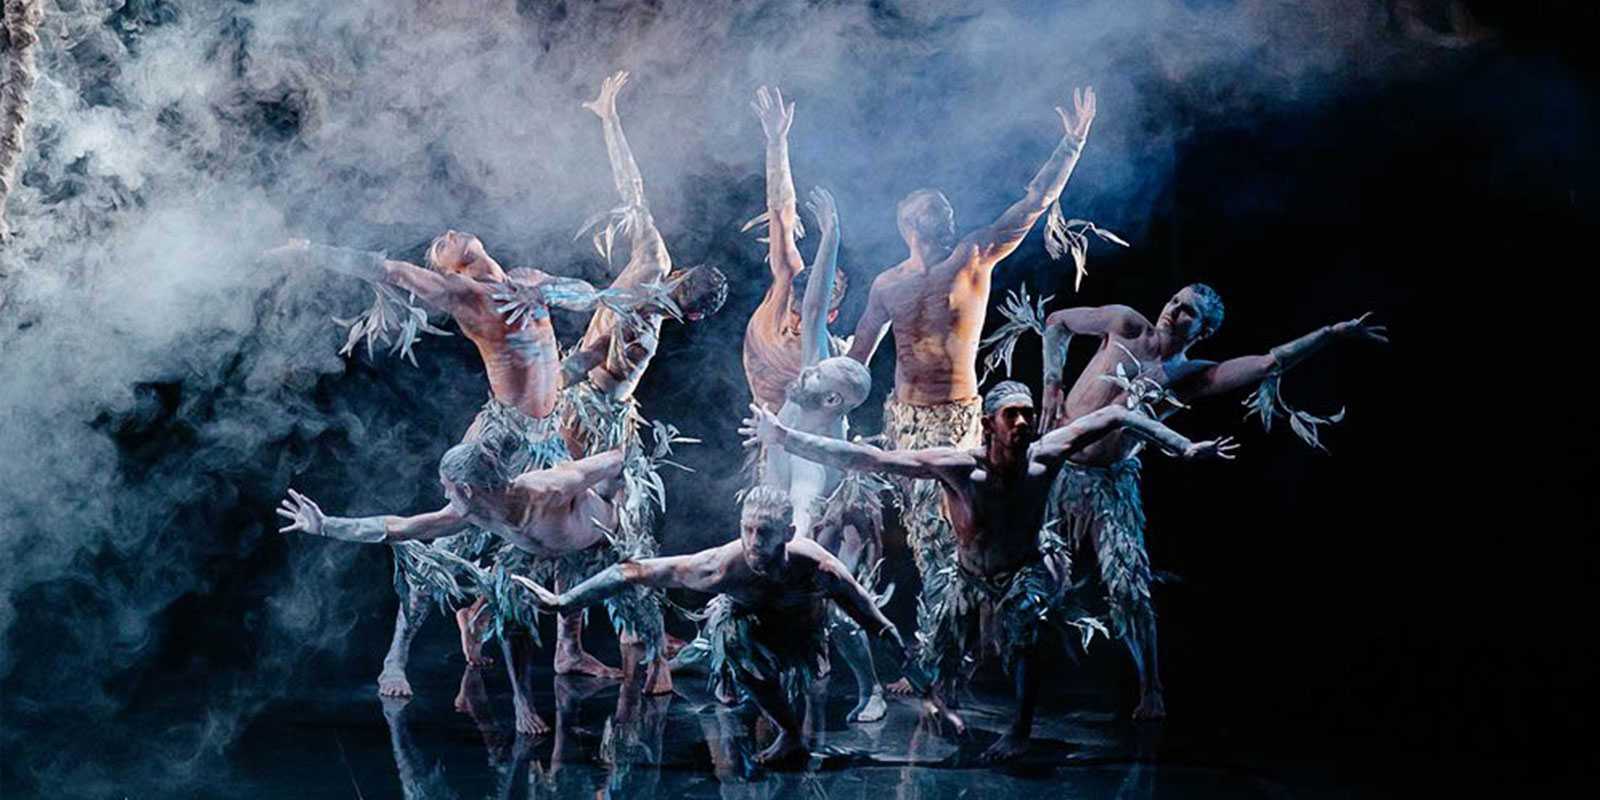 Image from Firestarter:The Story of Bangarra showcasing their masterful dance and traditions 